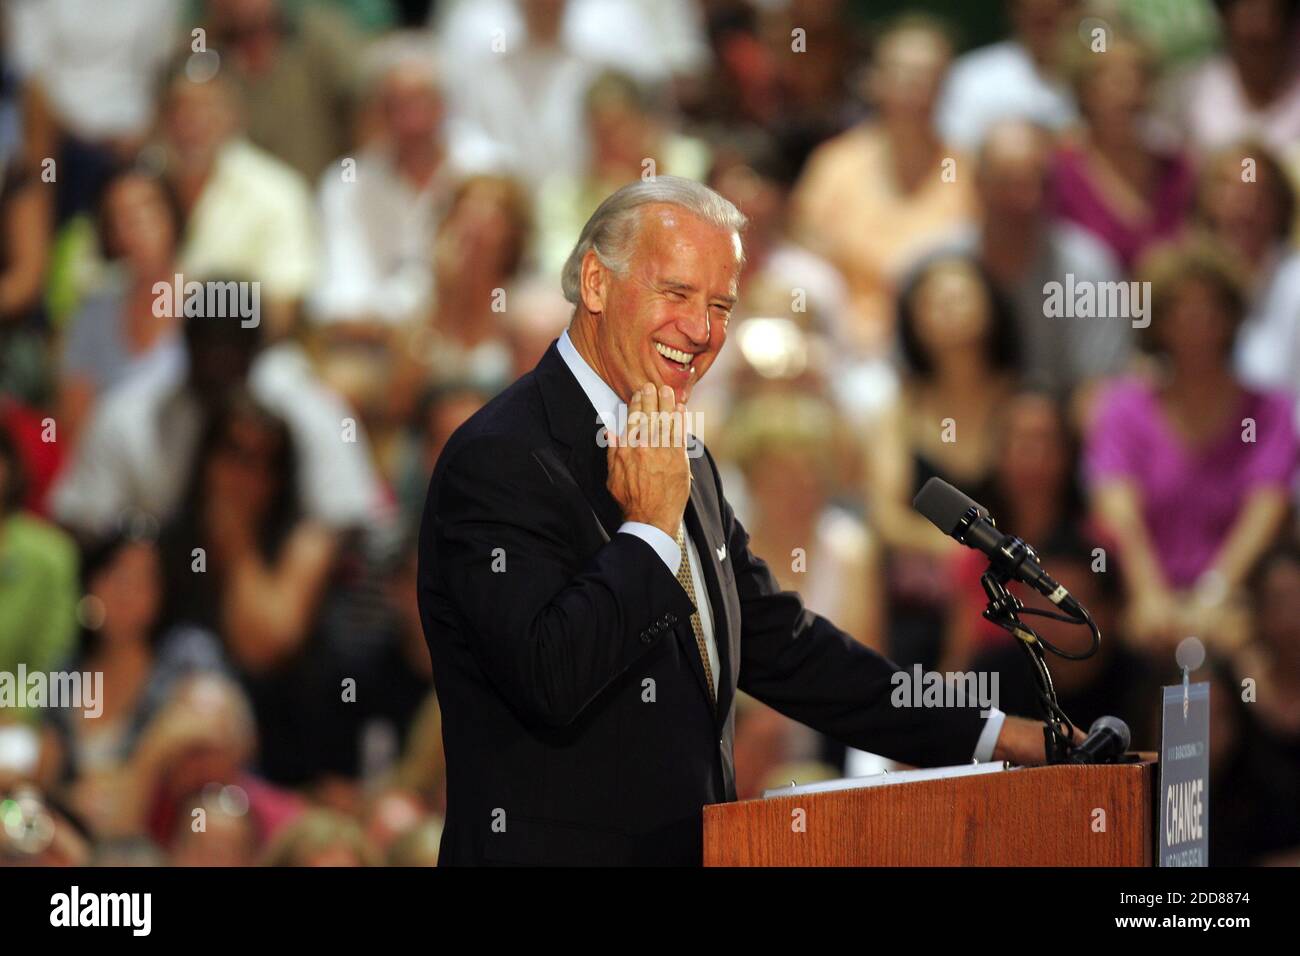 NO FILM, NO VIDEO, NO TV, NO DOCUMENTARY - Democratic vice-presidential nominee Joe Biden shares a light moment with a crowd gathered at the Maple Point Middle School in Langhorne, PA, USA, on Friday, September 5, 2008. Photo by David Swanson/Philadelphia Inquirer/MCT/ABACAPRESS.COM Stock Photo